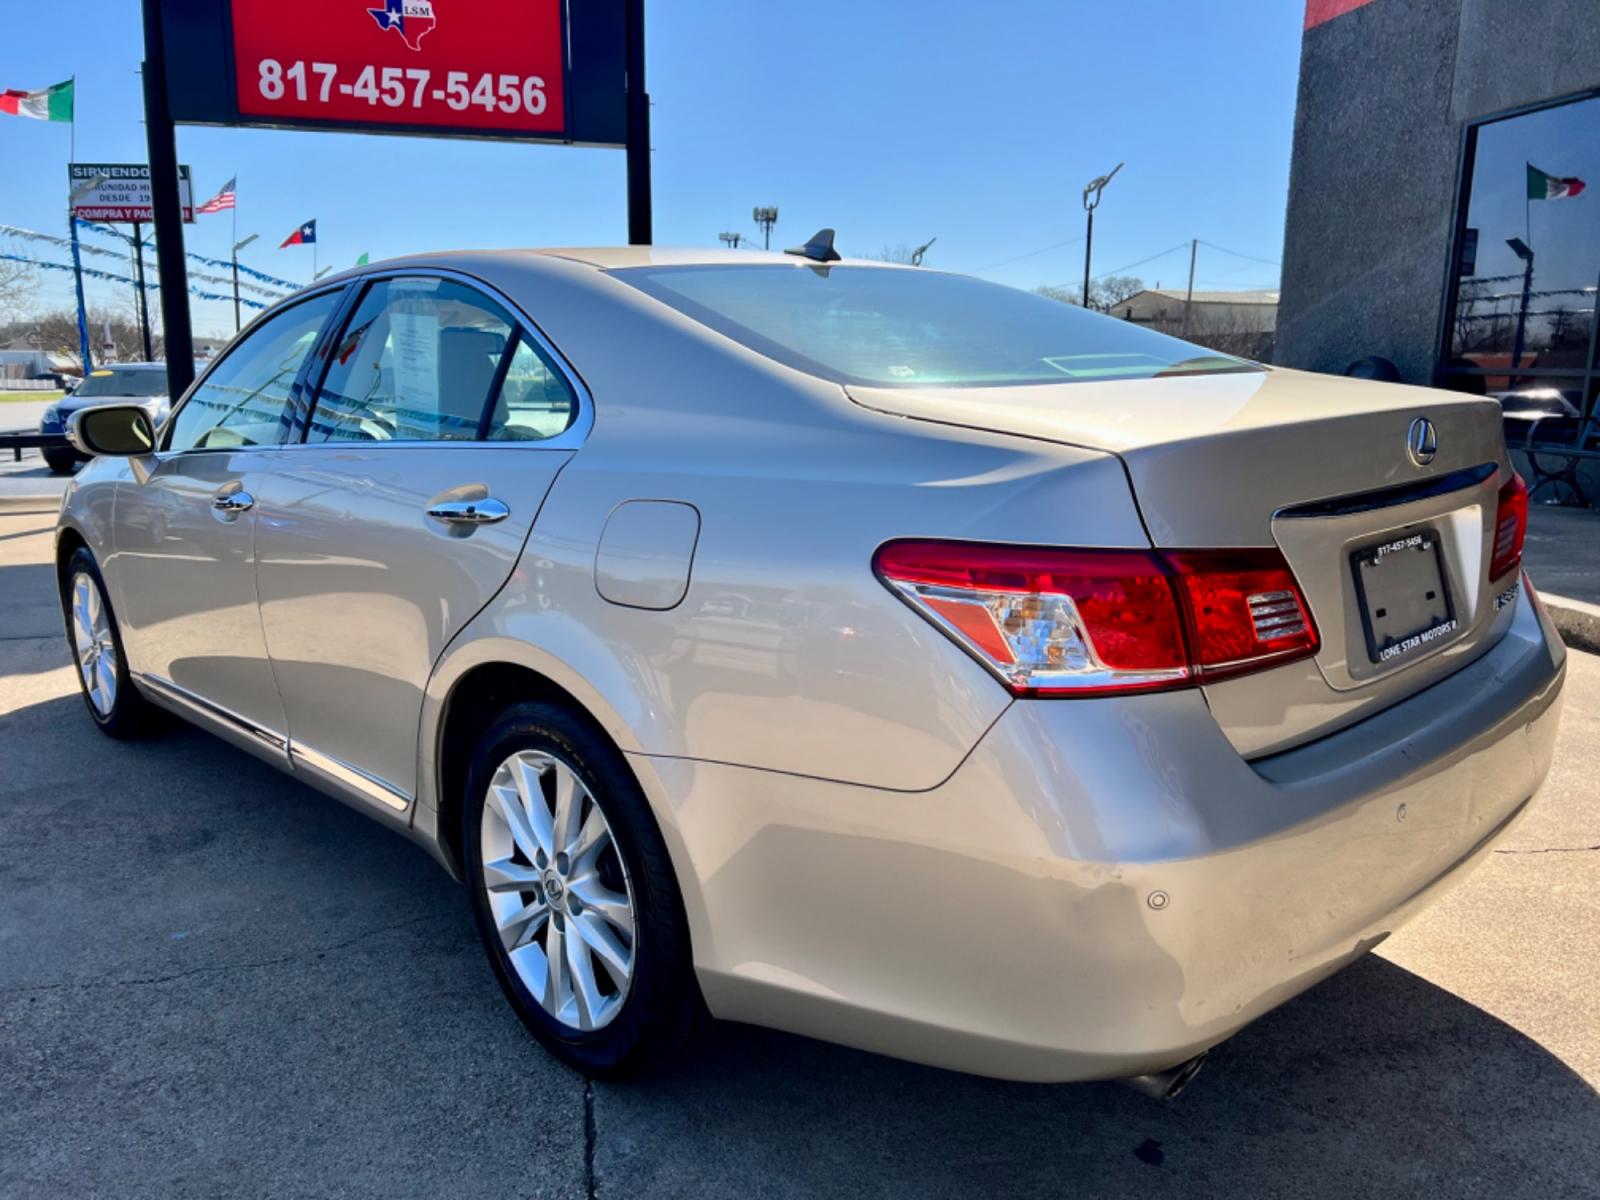 2011 GOLD LEXUS ES 350 (JTHBK1EG9B2) , located at 5900 E. Lancaster Ave., Fort Worth, TX, 76112, (817) 457-5456, 0.000000, 0.000000 - This is a 2011 LEXUS ES 350 4 DOOR SEDAN that is in excellent condition. There are no dents or scratches. The interior is clean with no rips or tears or stains. All power windows, door locks and seats. Ice cold AC for those hot Texas summer days. It is equipped with a CD player, AM/FM radio, AUX por - Photo #4